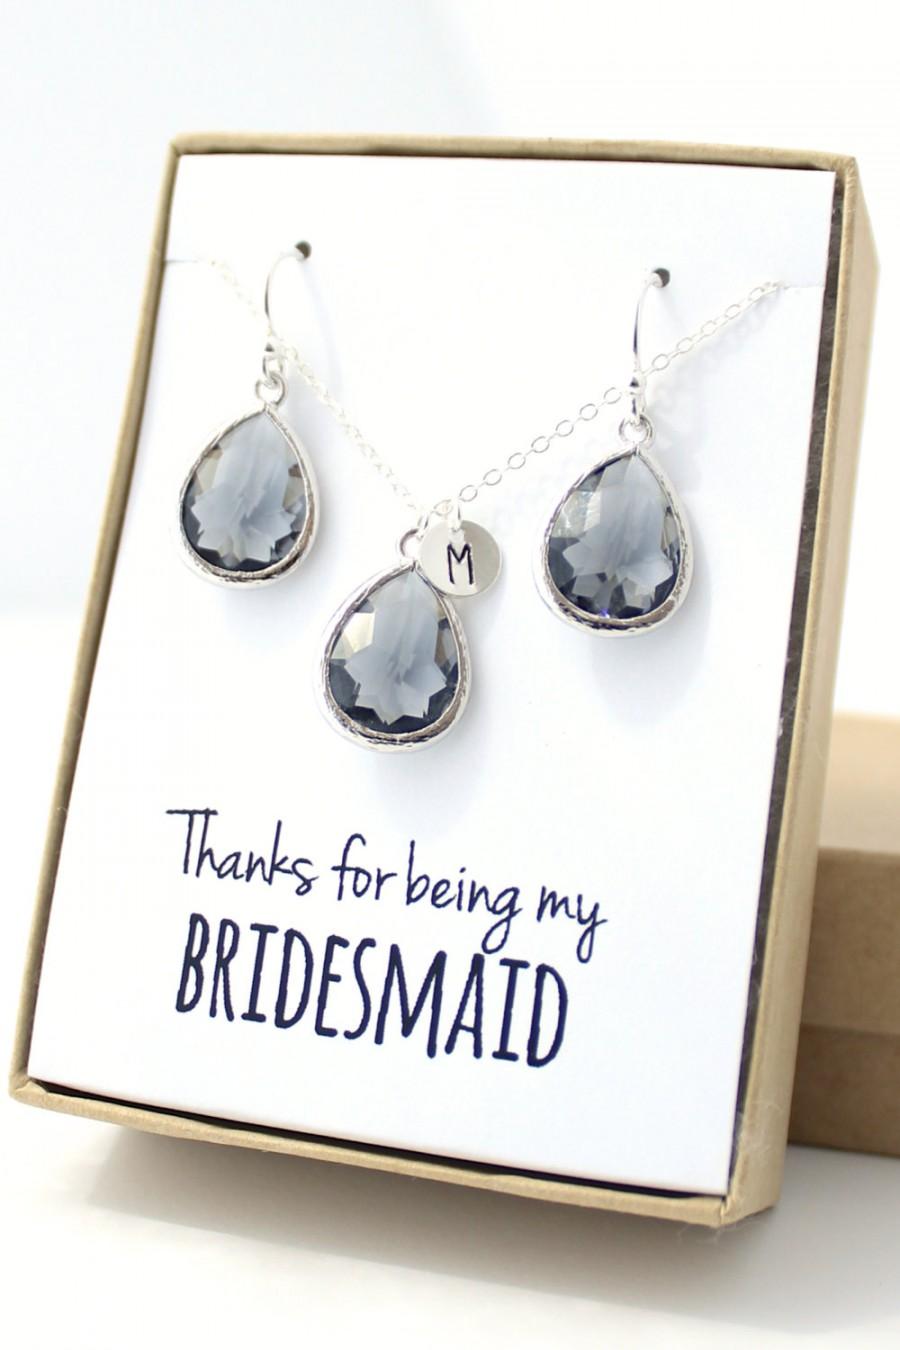 Hochzeit - Charcoal Gray / Silver Teardrop Necklace and Earring Set - Bridesmaid Gift - Charcoal Bridesmaid Set - Bridesmaid Jewelry Set - ENB1